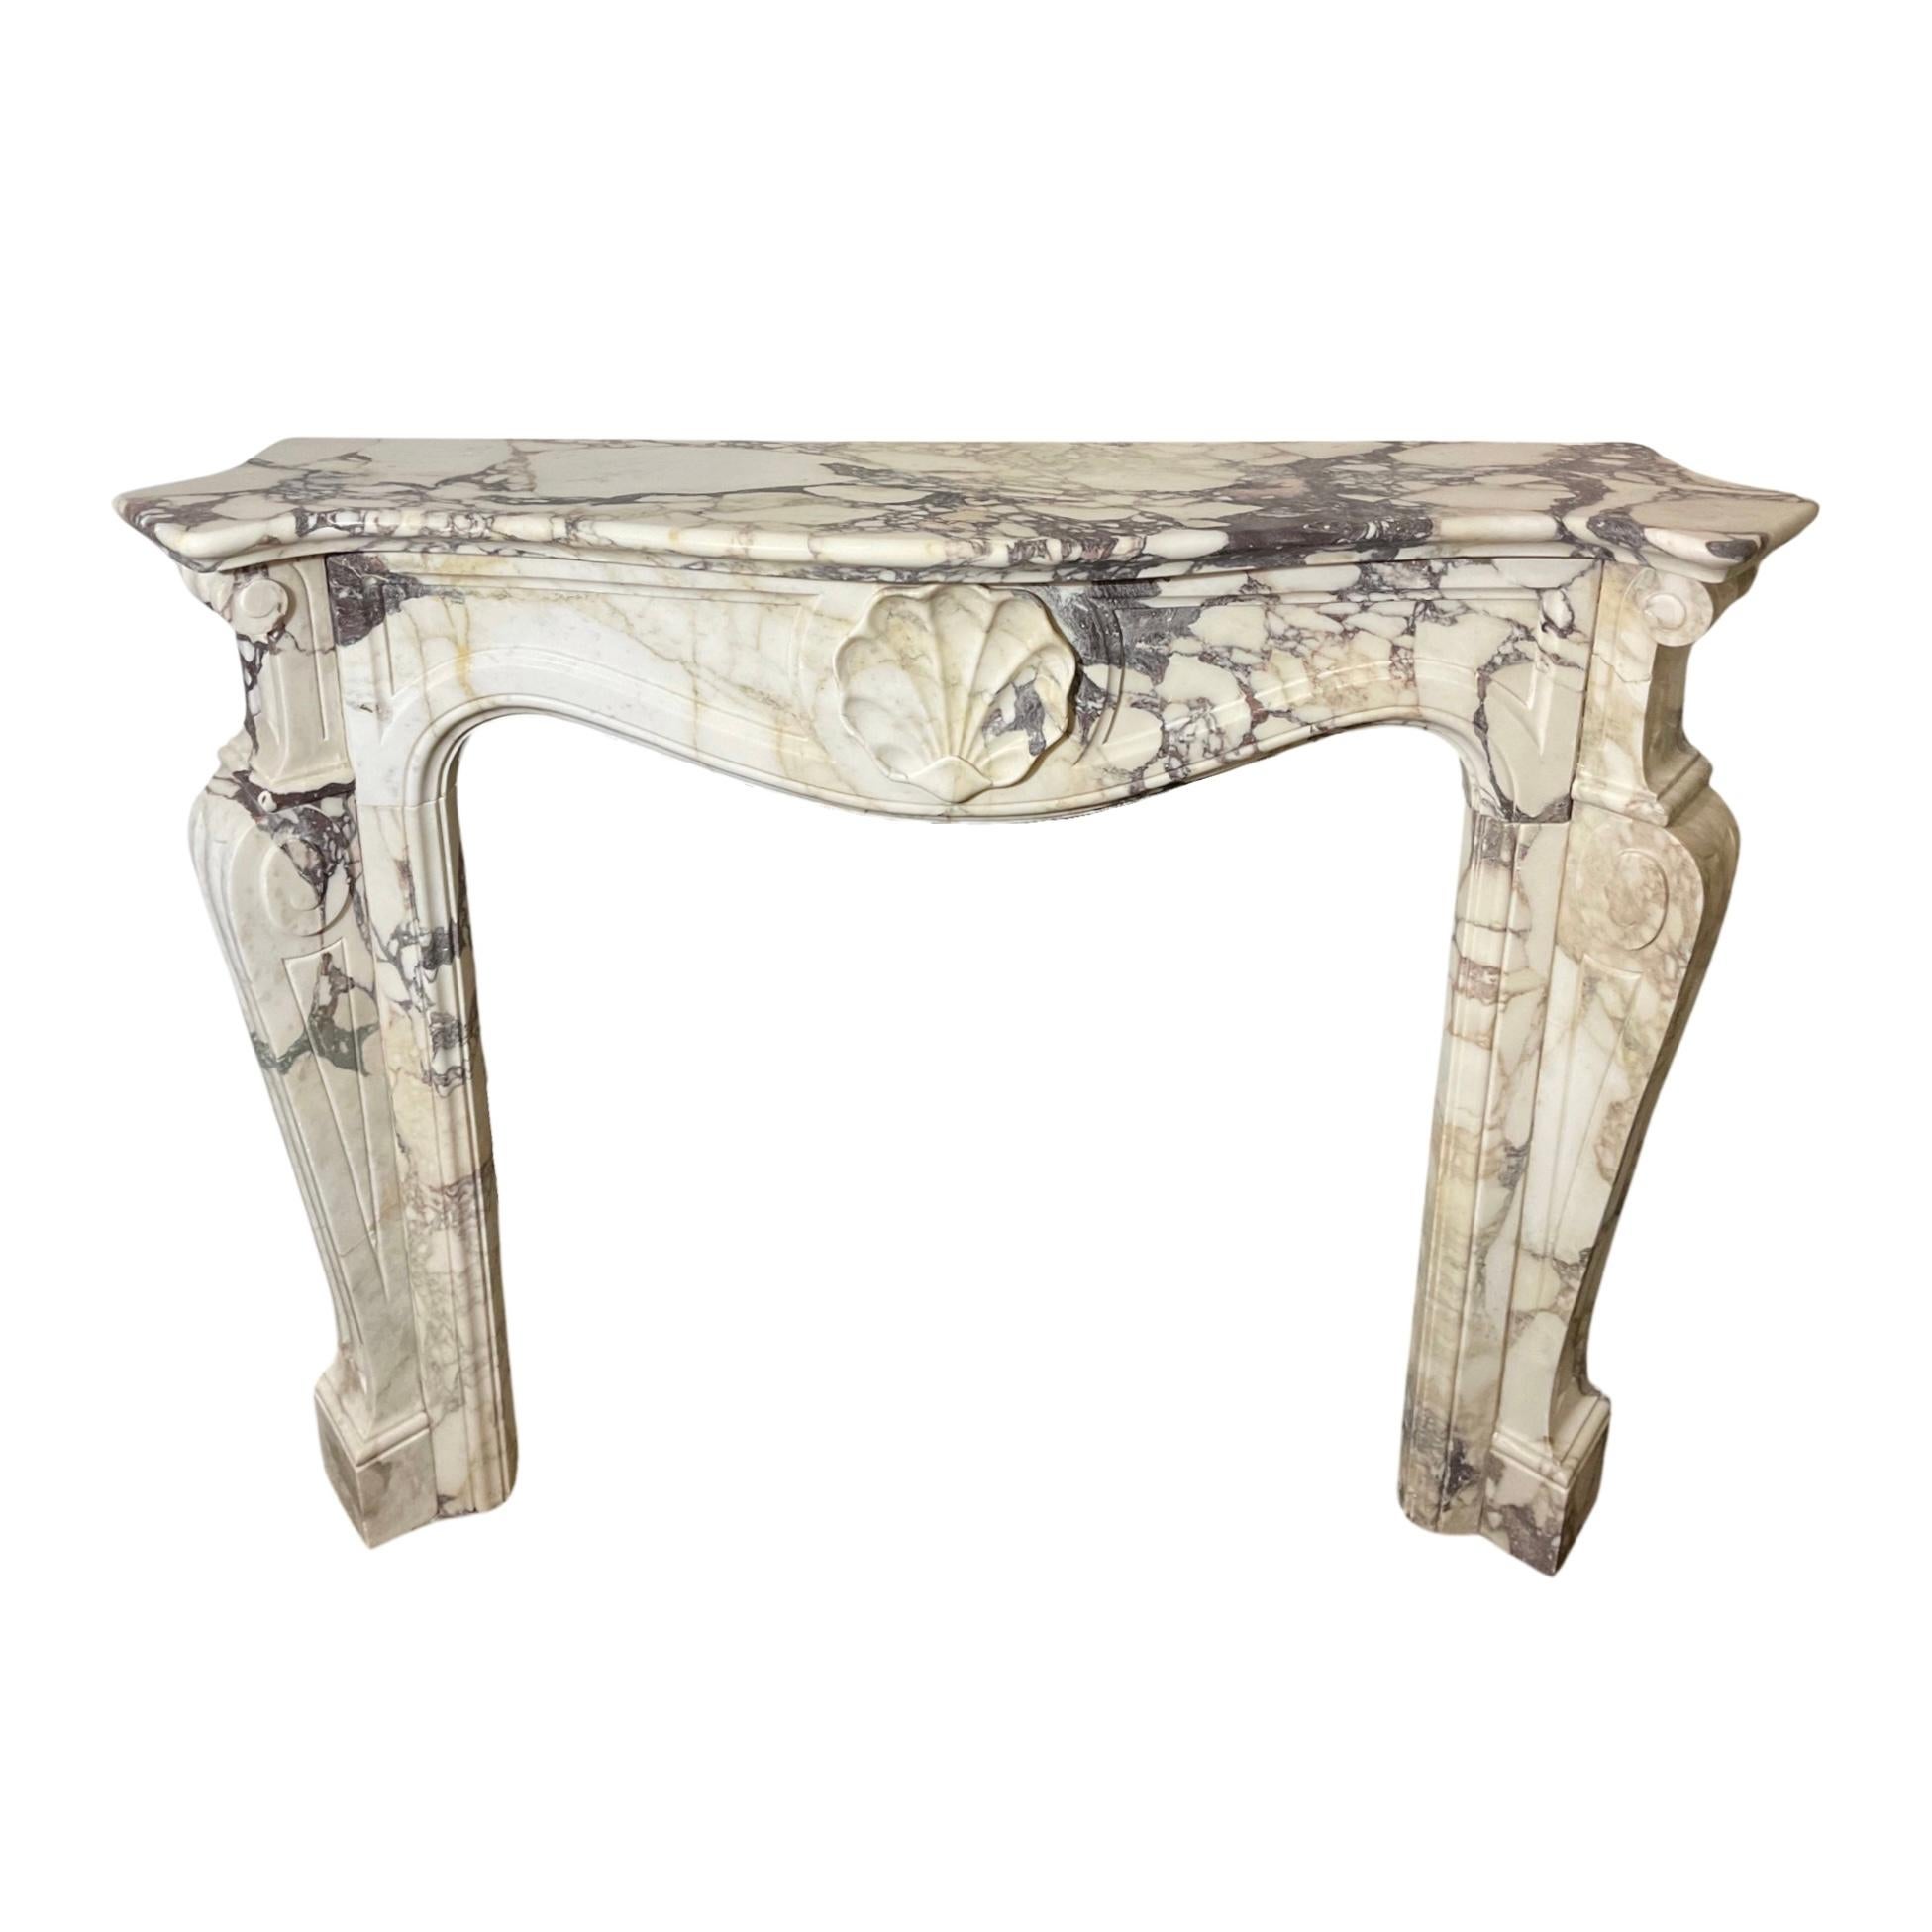 This French white Breche Marble Mantel from the 1850s exudes elegance and sophistication. Crafted in the Louis XVI style, it features a stunning shell carving in the center. Made from high-quality white Breche marble imported from France, this